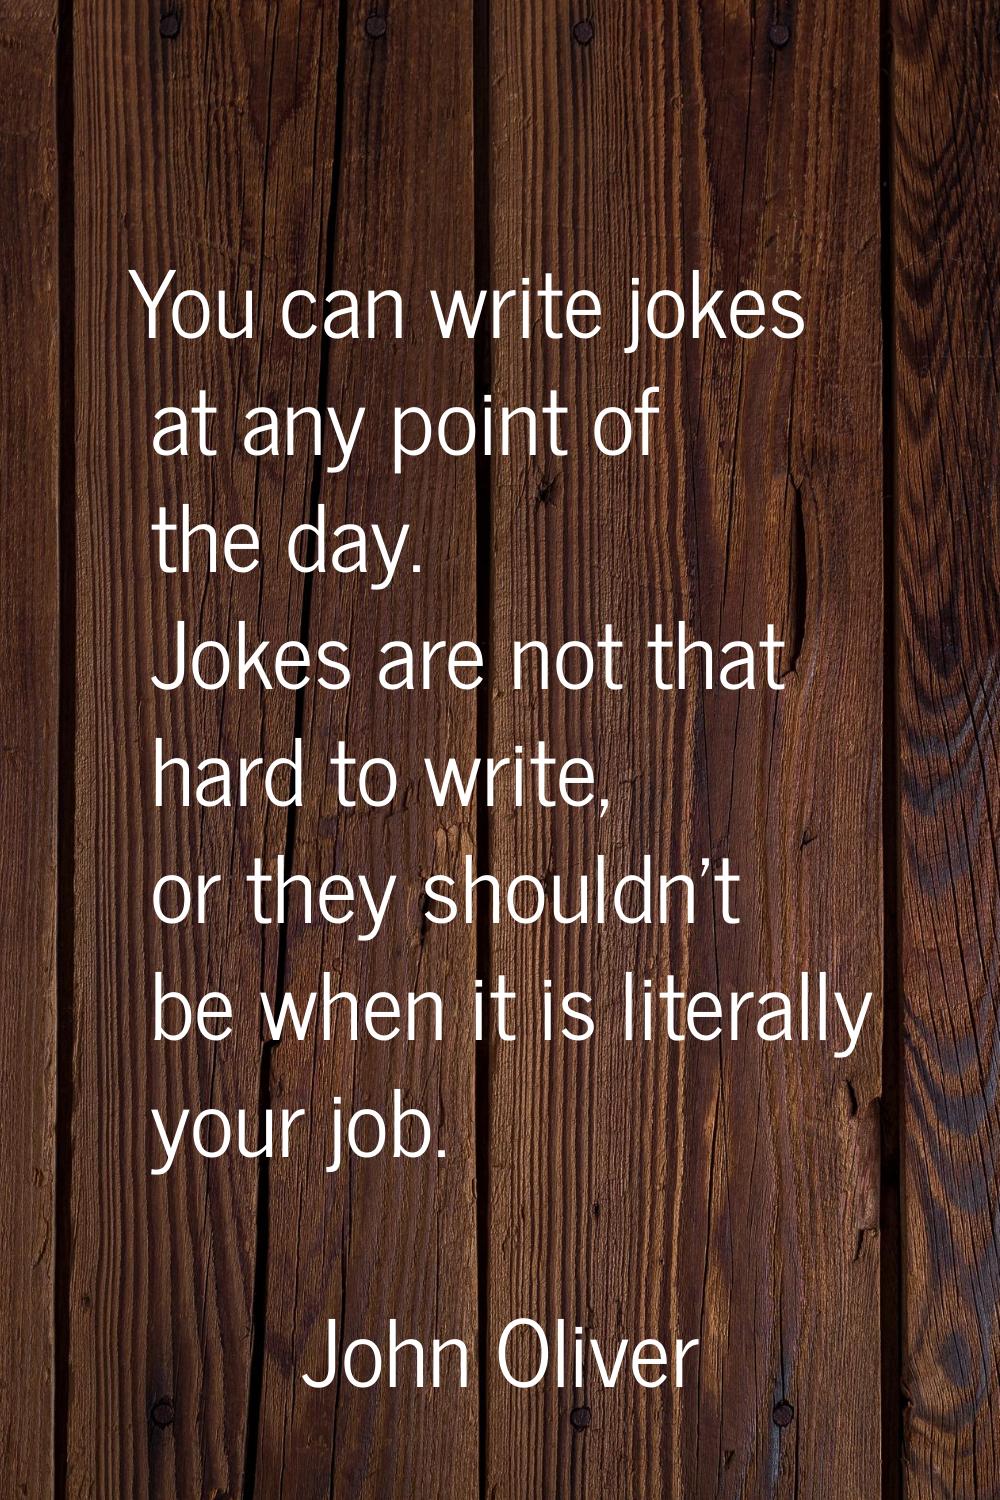 You can write jokes at any point of the day. Jokes are not that hard to write, or they shouldn't be